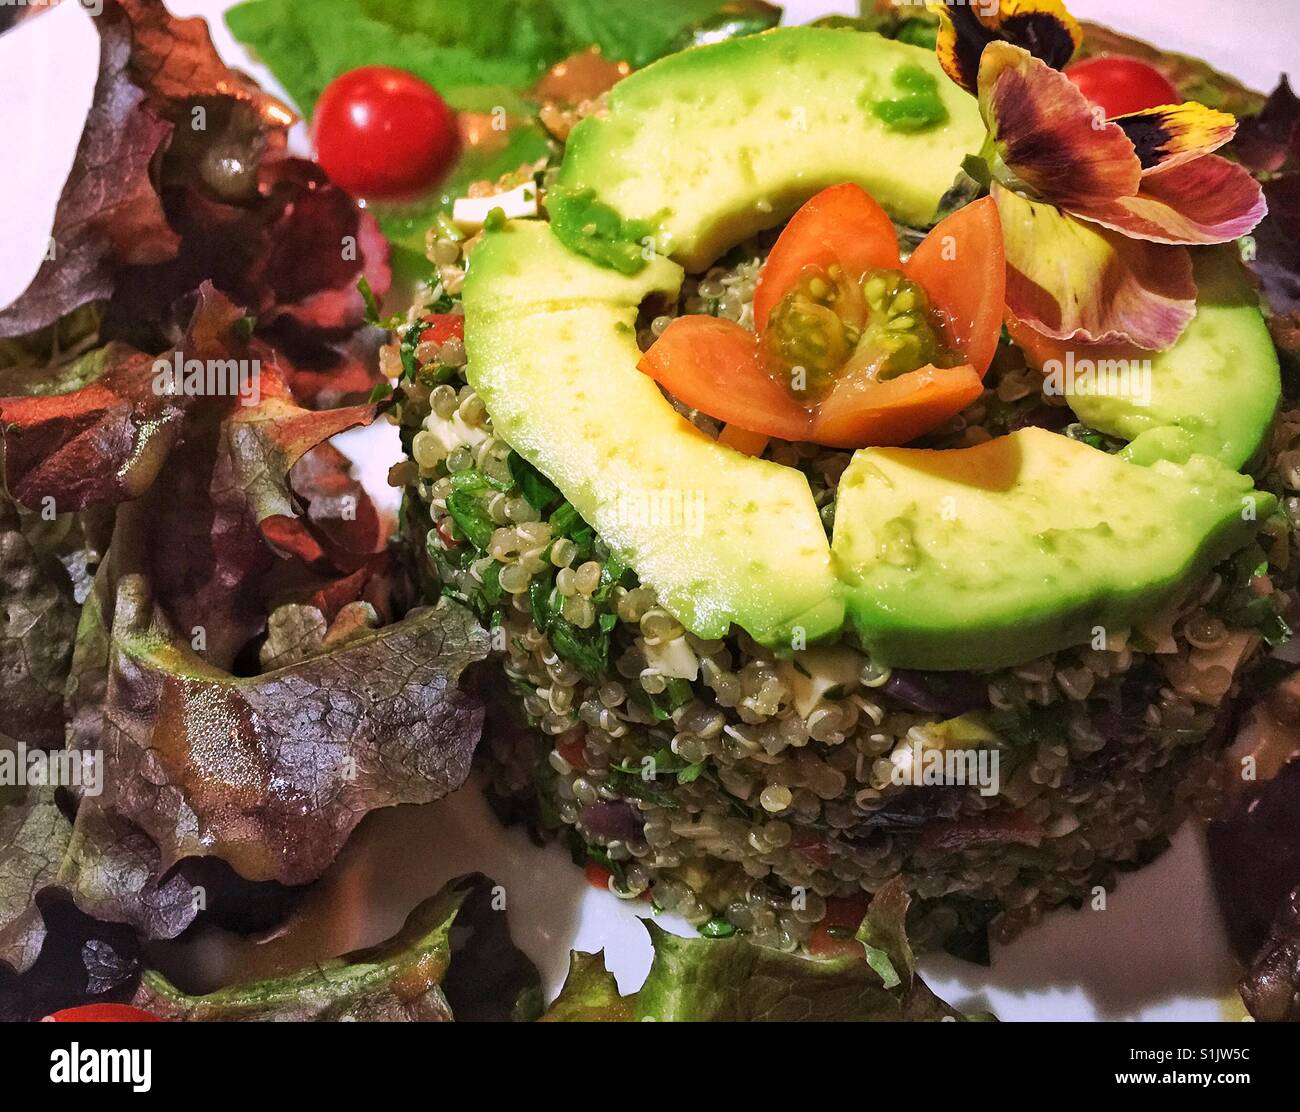 Quinoa tower served on bed of lettuce and tomatoes with avocado and edible flowers in Peru Stock Photo